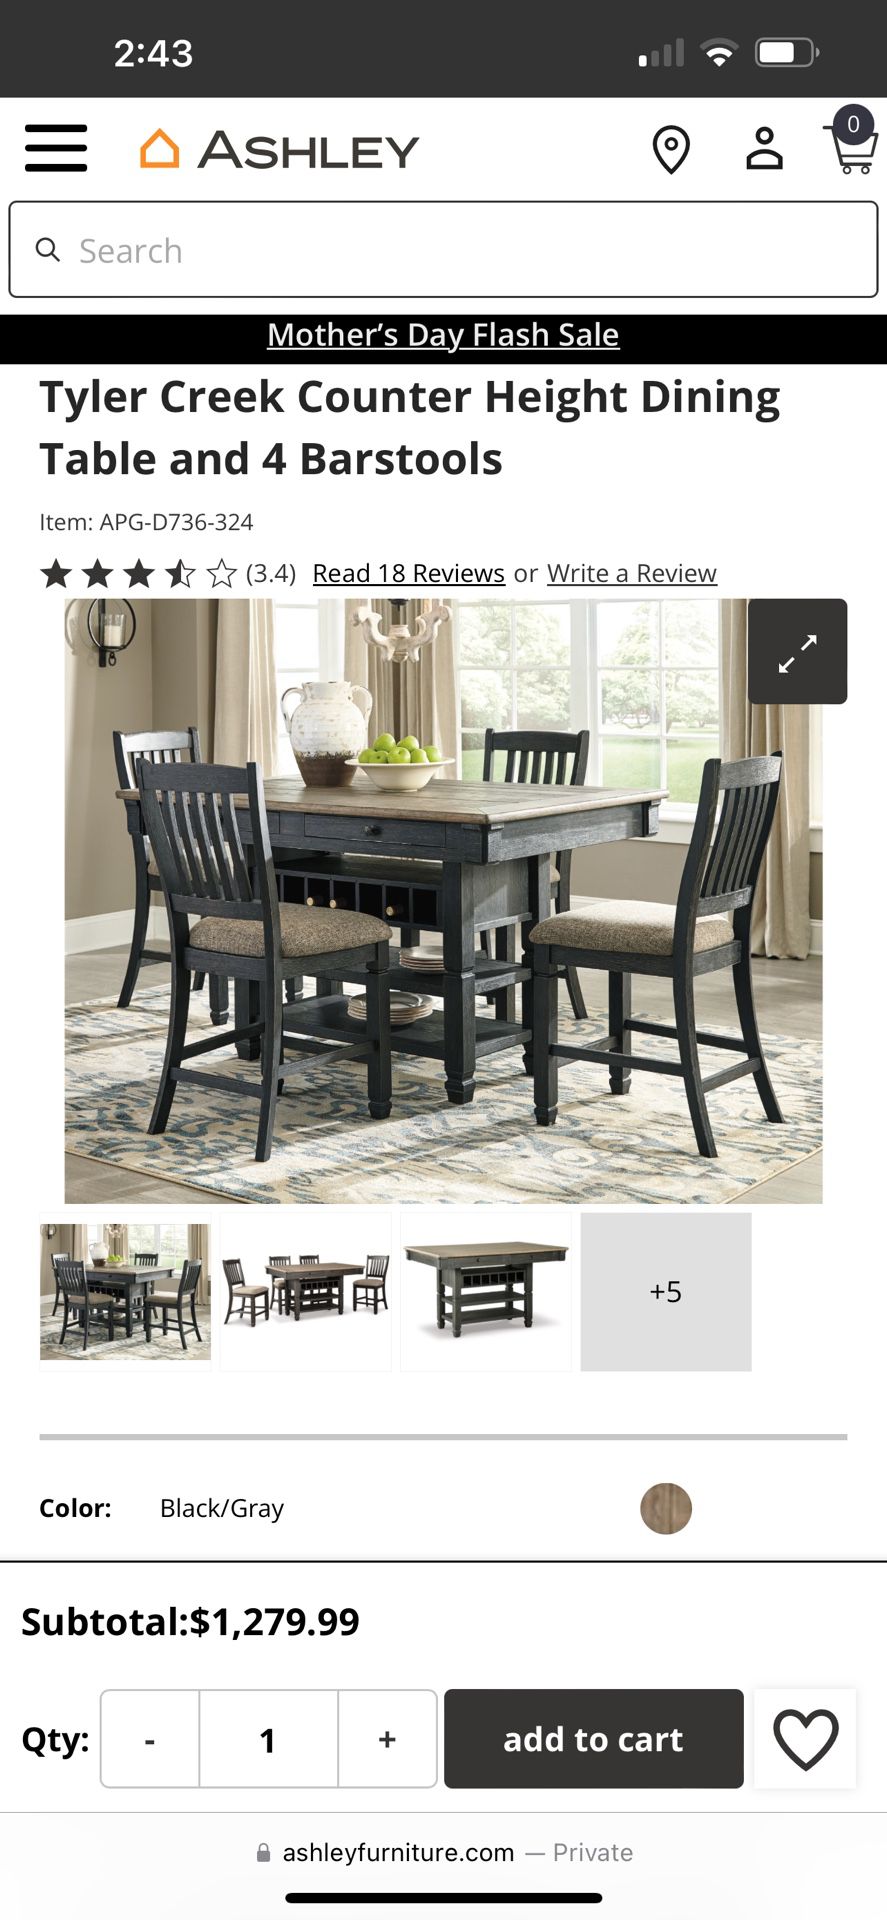 Ashley: Tyler Creek Counter Height Dining Table and 4 Barstools